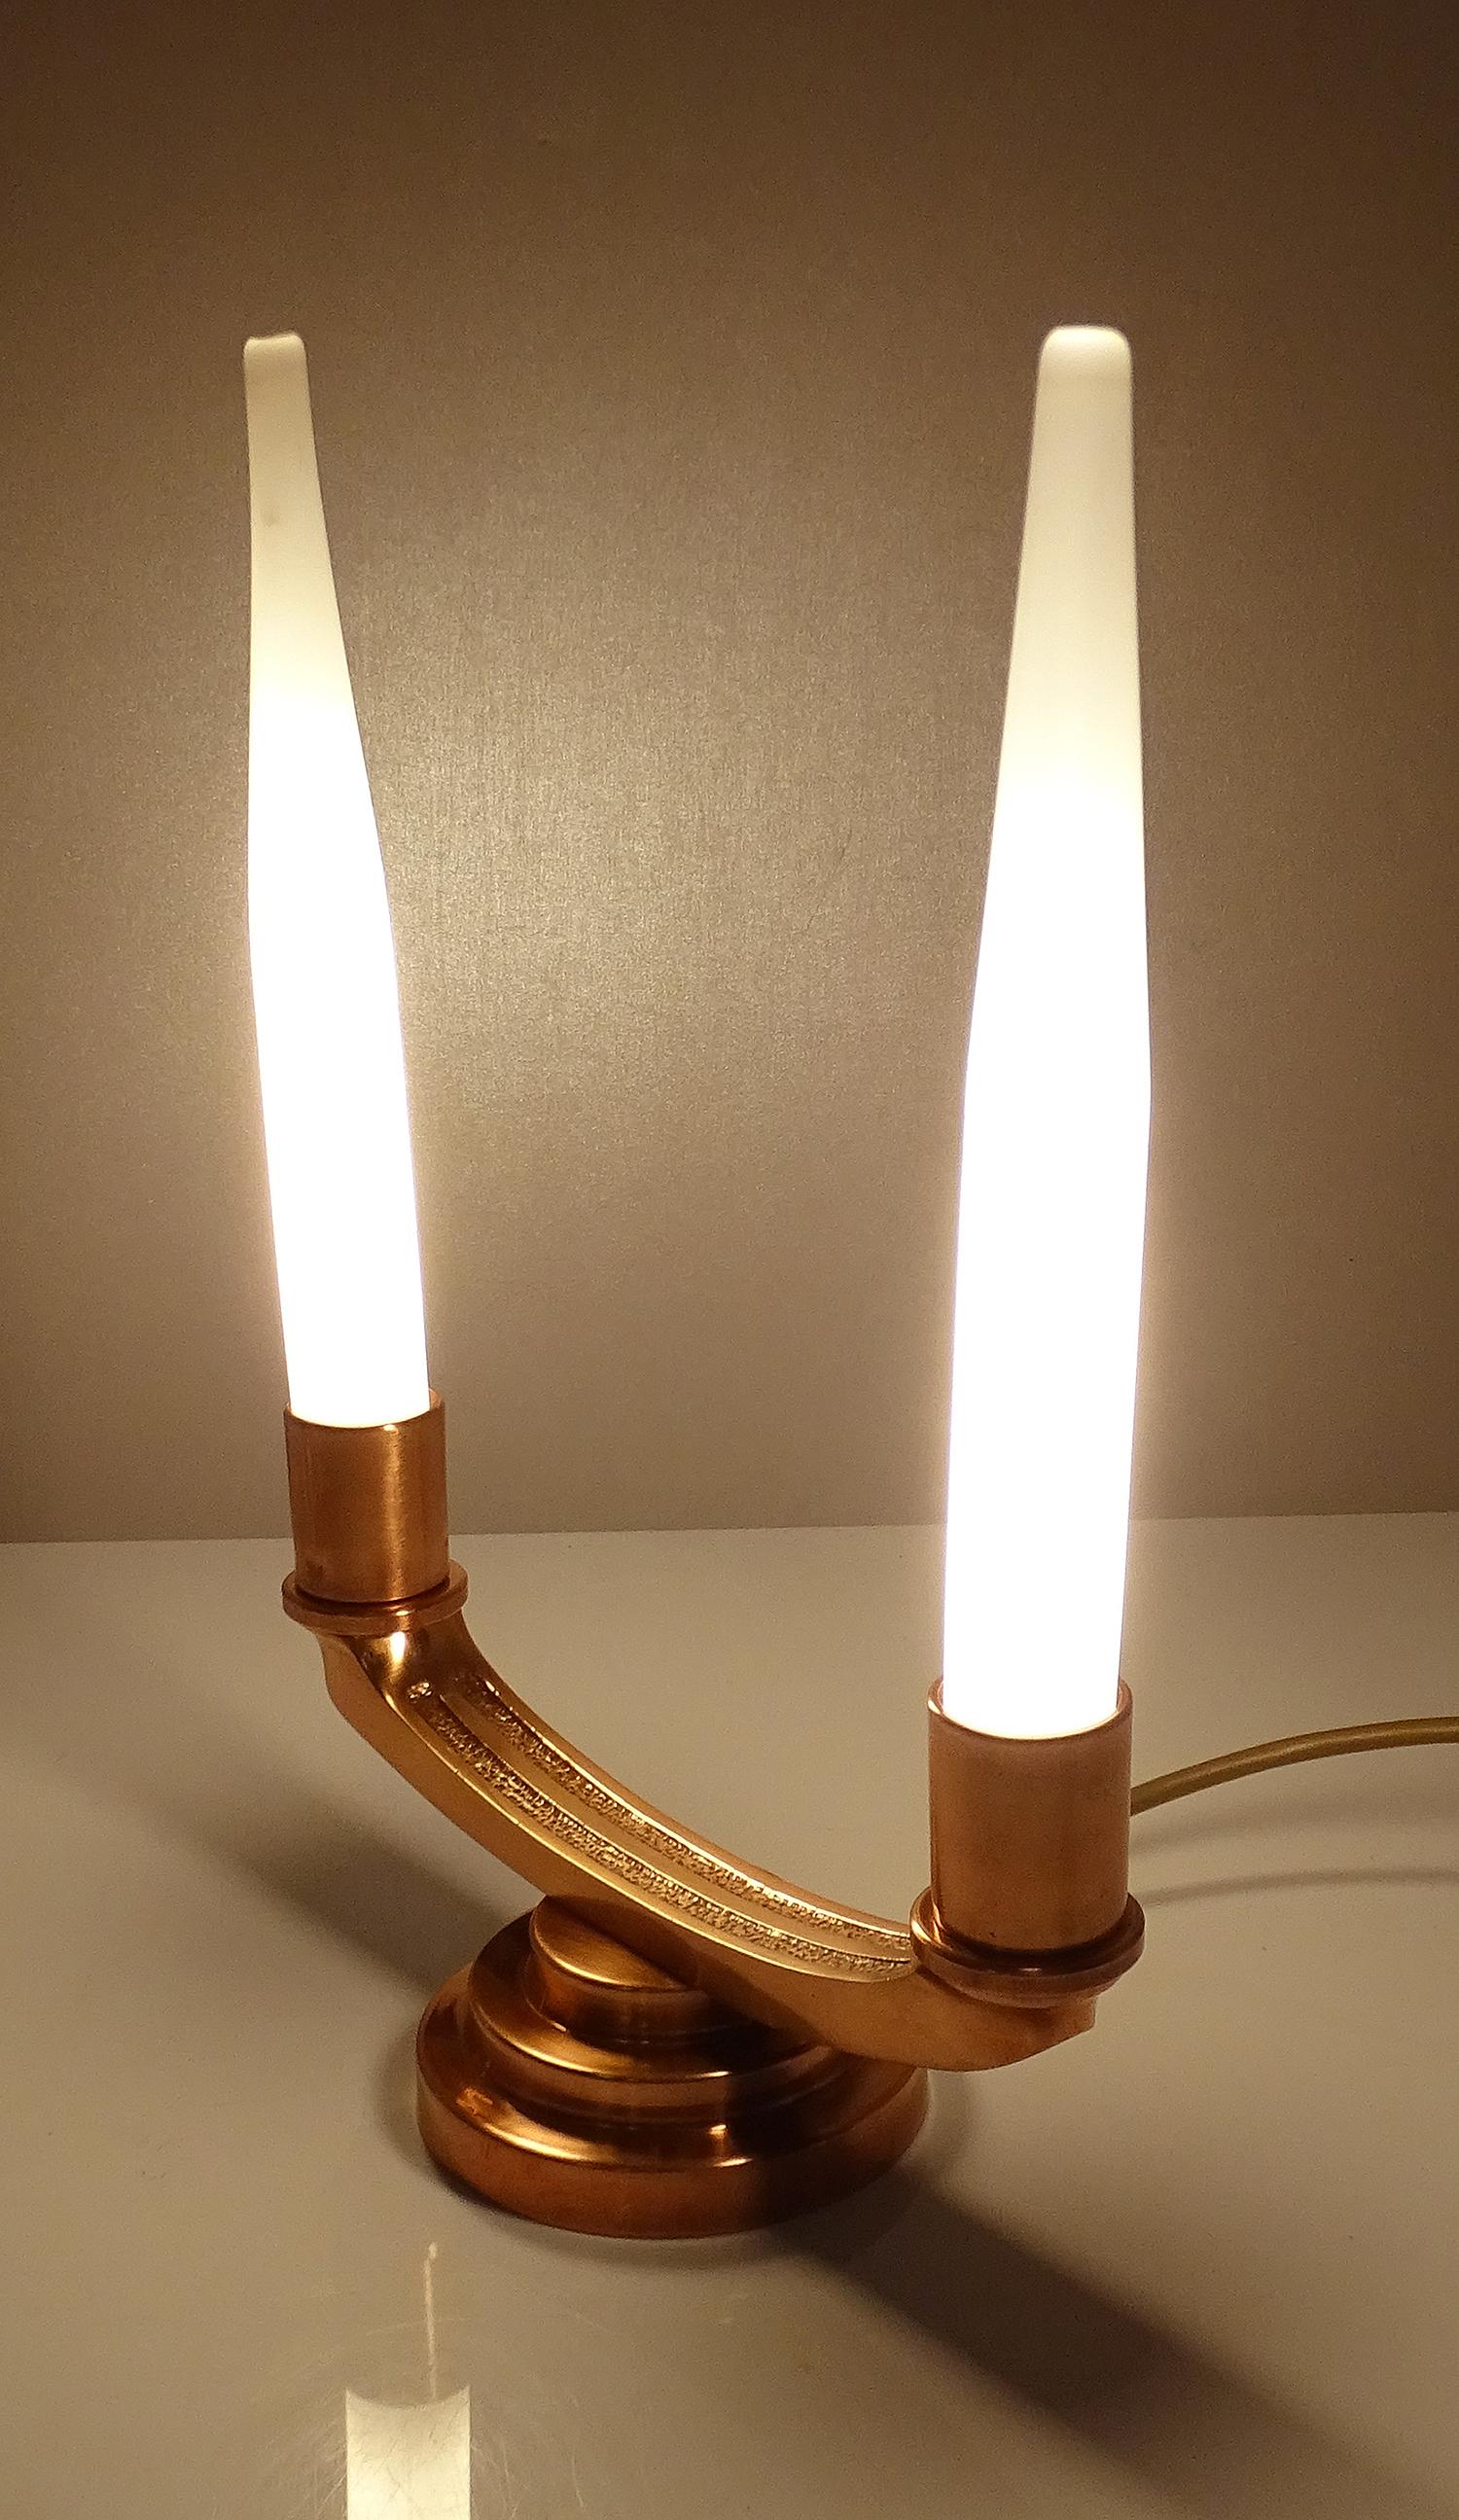 Pair of French Art Deco Modernist Uplighter  Lamps, Brass Copper Glass  Lights For Sale 6